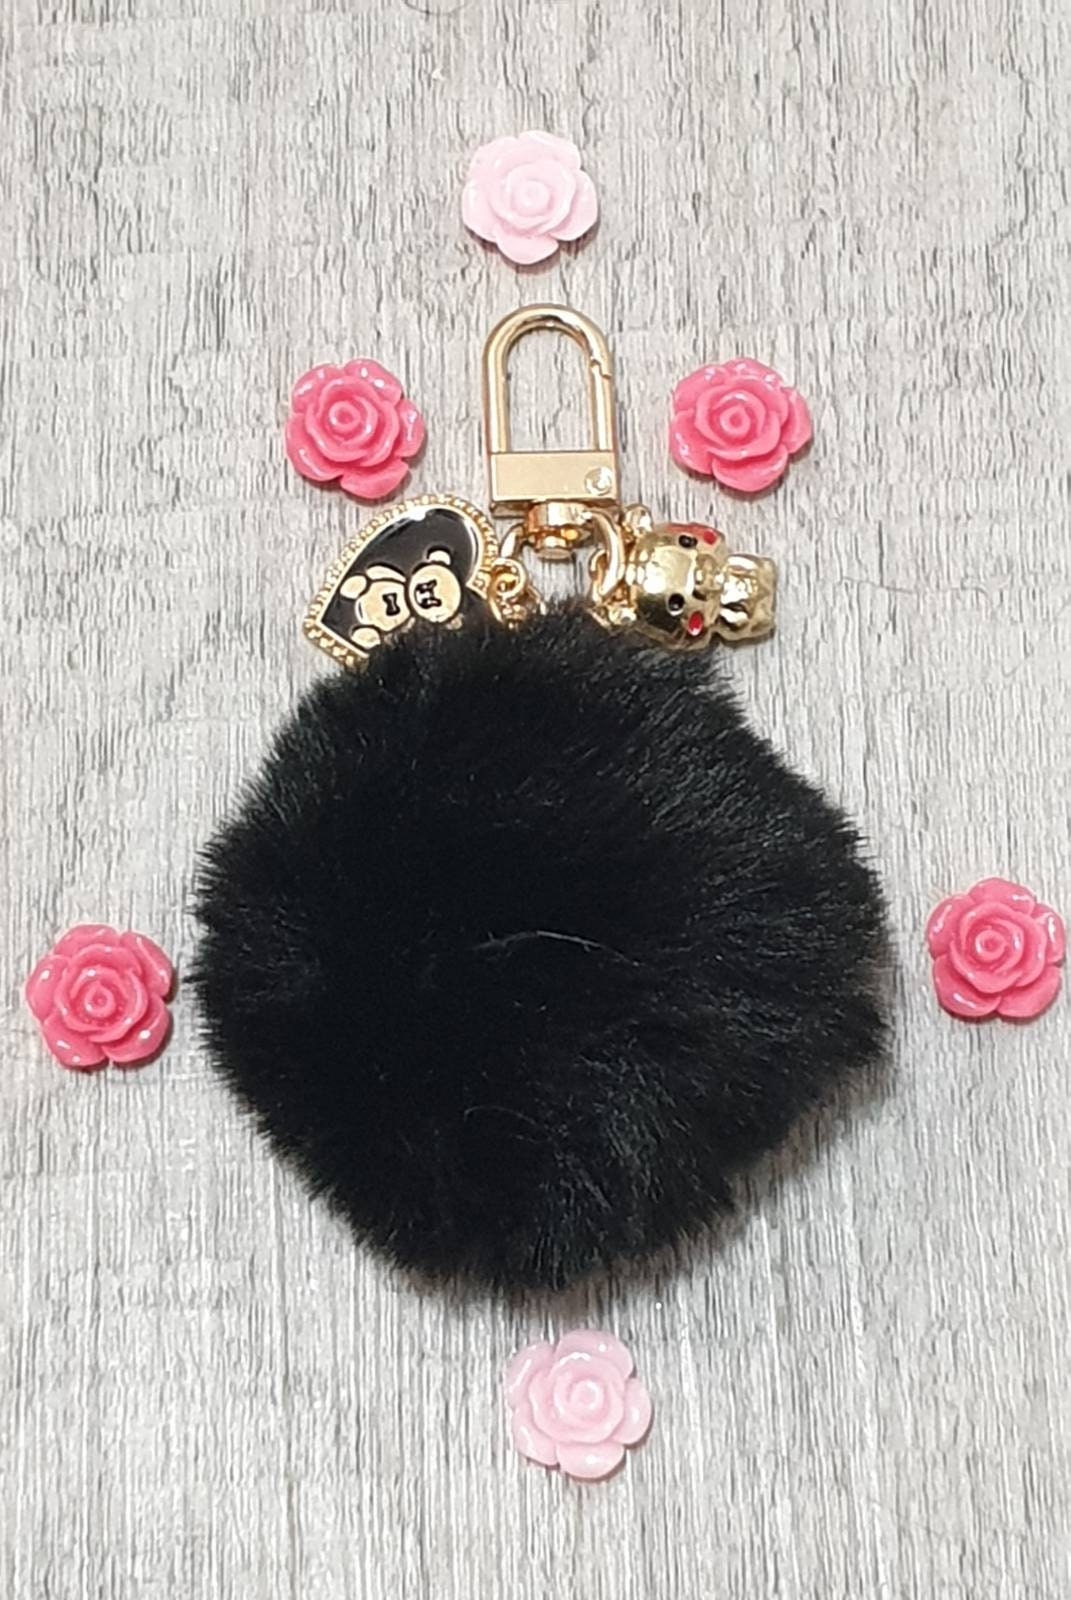 Designer Flower Bag Charm Keychain Wallet Purse Pendant With Coin Holder  And Trinket Mini Coin Charm Bucket Bag Accessory From Boutique6868, $8.21